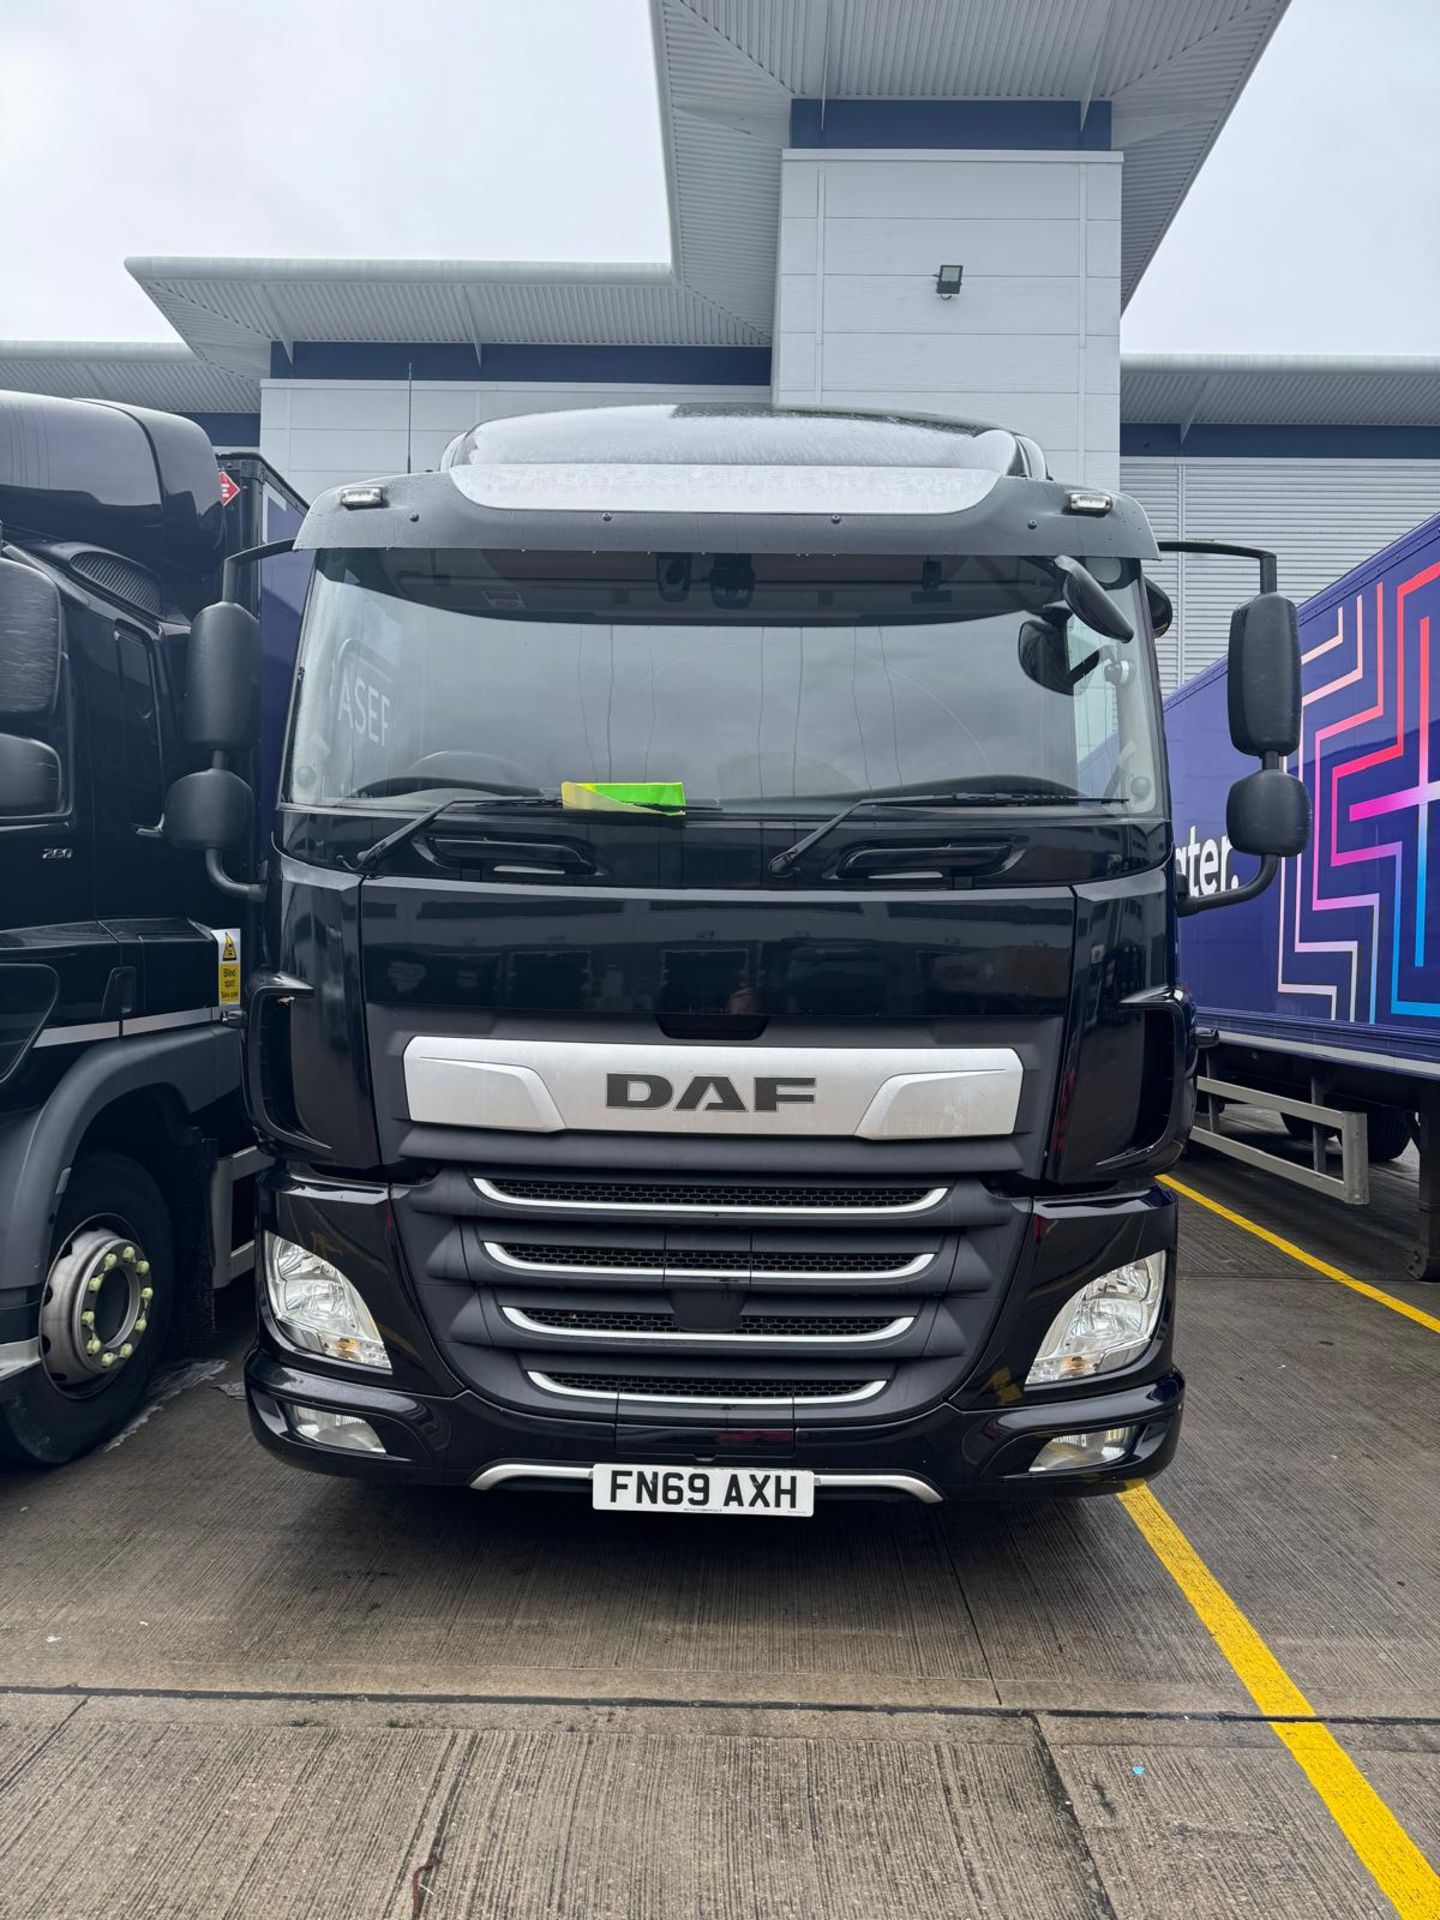 2019, DAF CF 260 FA - FN69 AXH (18 Ton Rigid Truck with Tail Lift) - Image 6 of 22